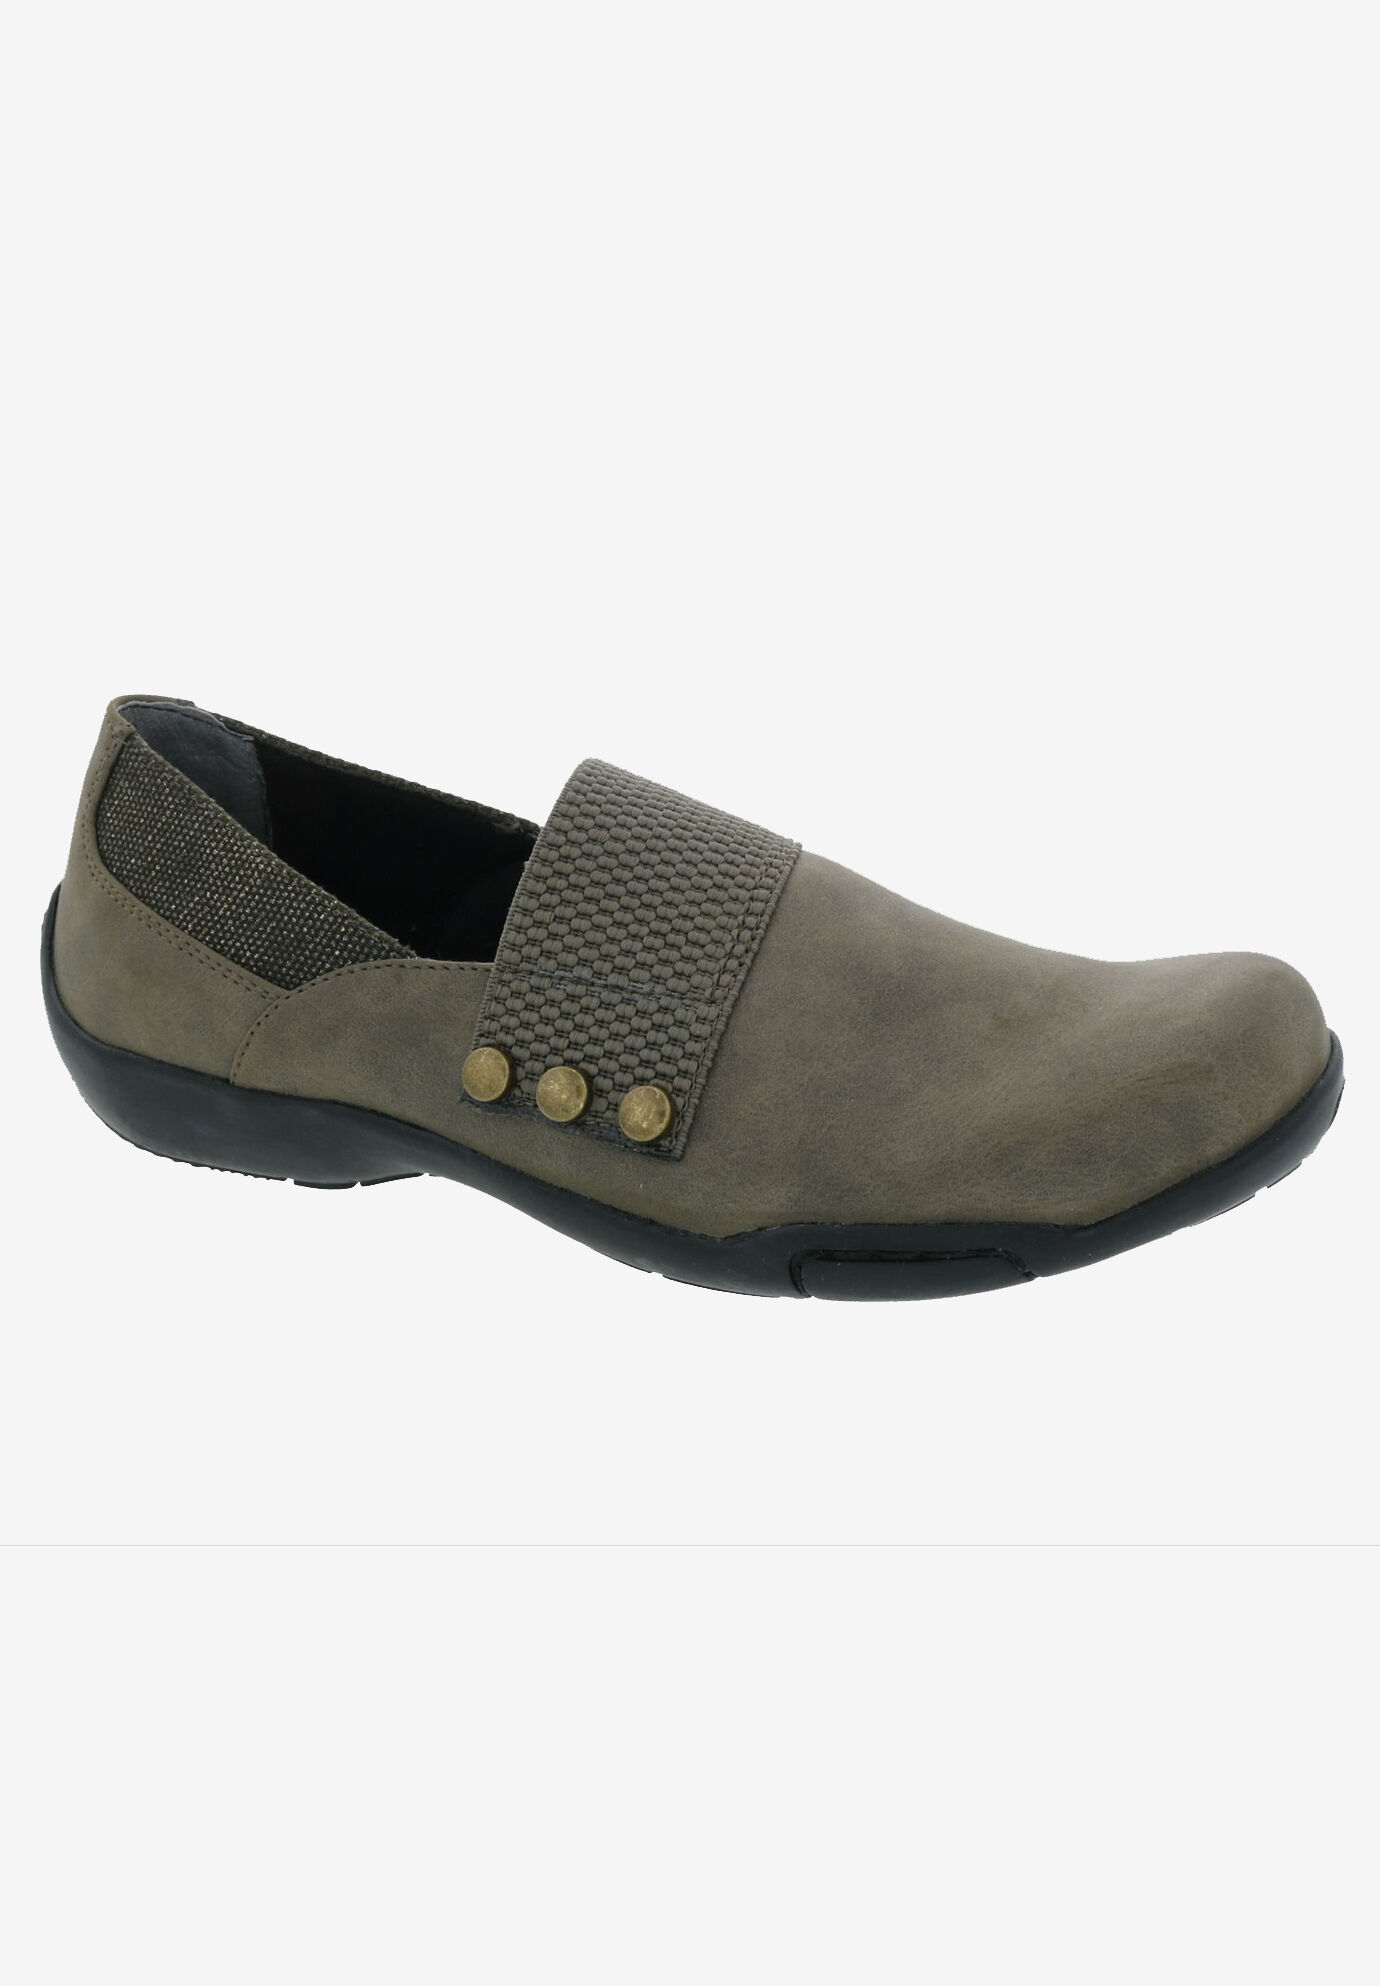 Wide Width Women's Cake Flat by Ros Hommerson in Olive (Size 8 W)